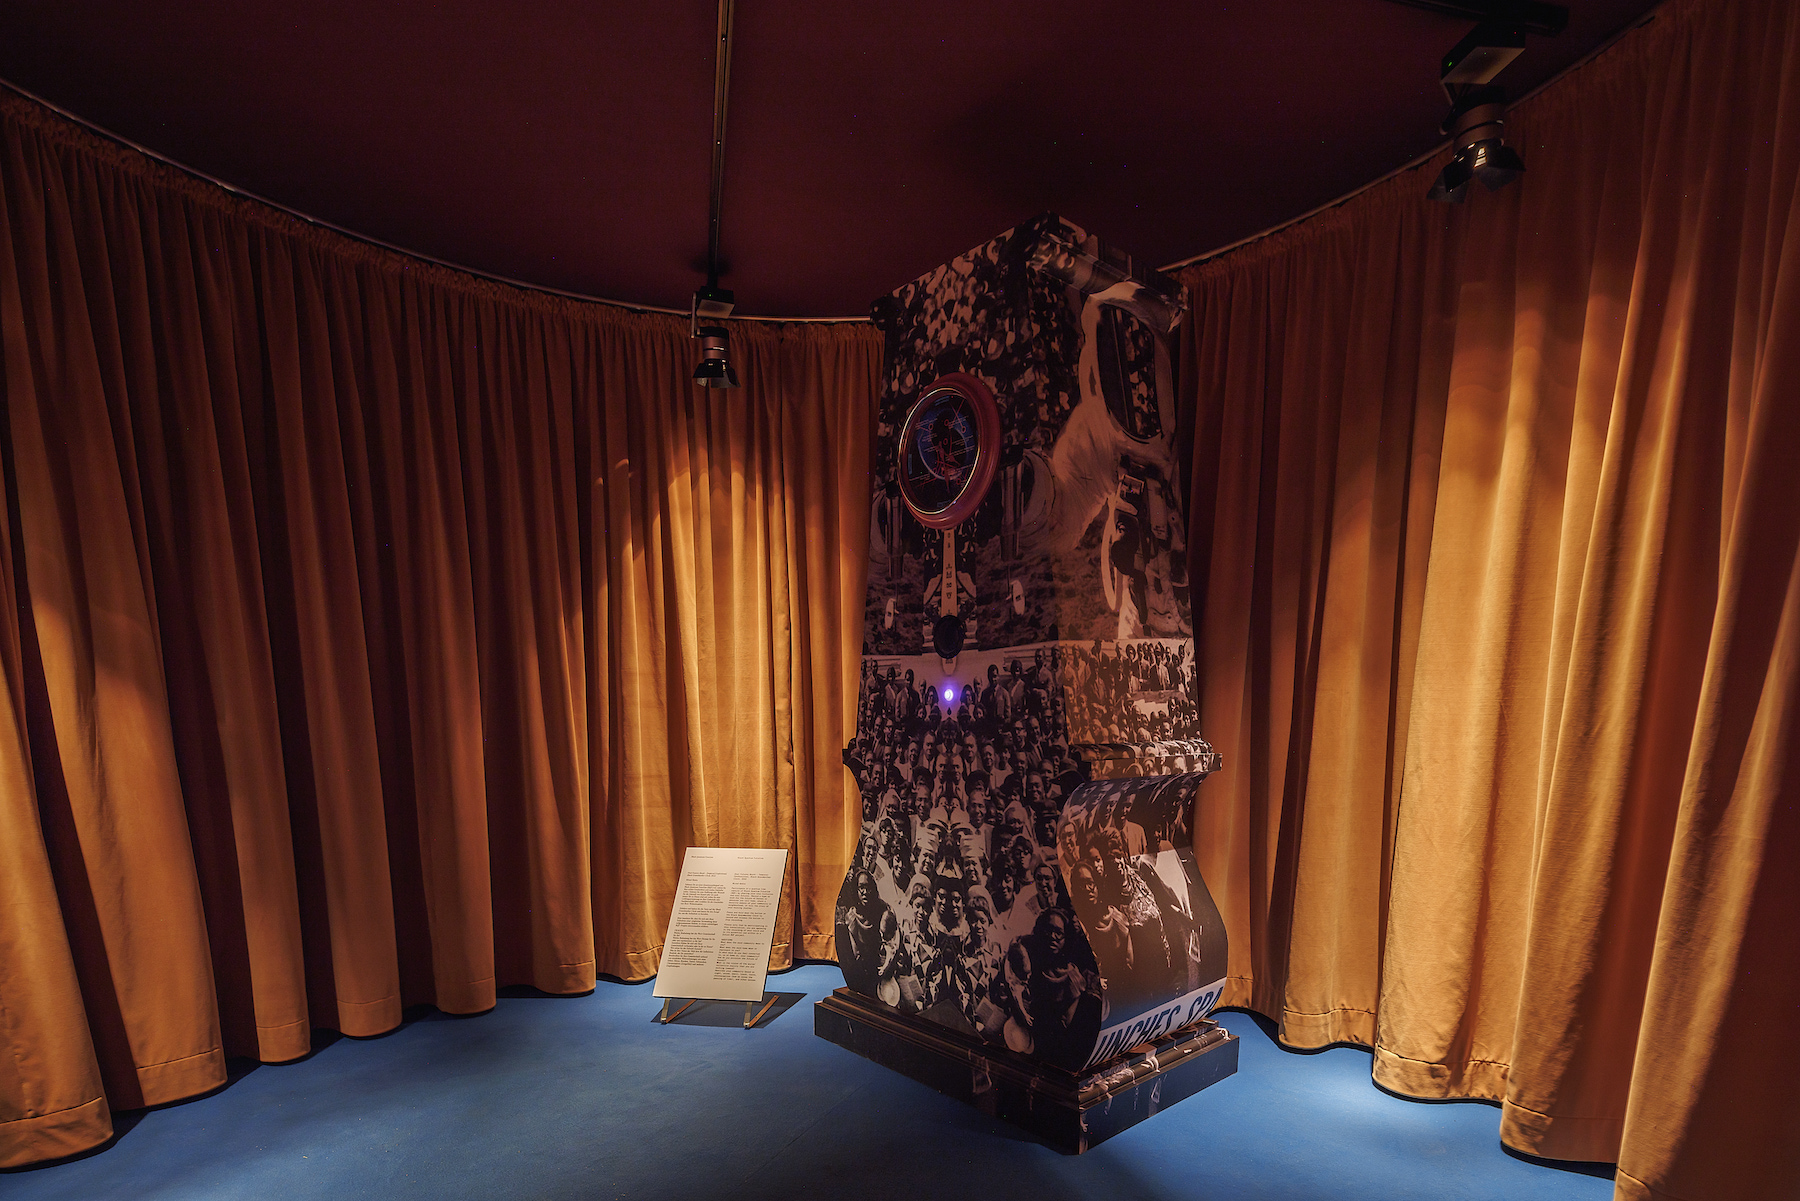 A big grandfather clock with photographs of different people printed on the clock is in the middle of a dark room with dark yellow curtains and blue flooring.